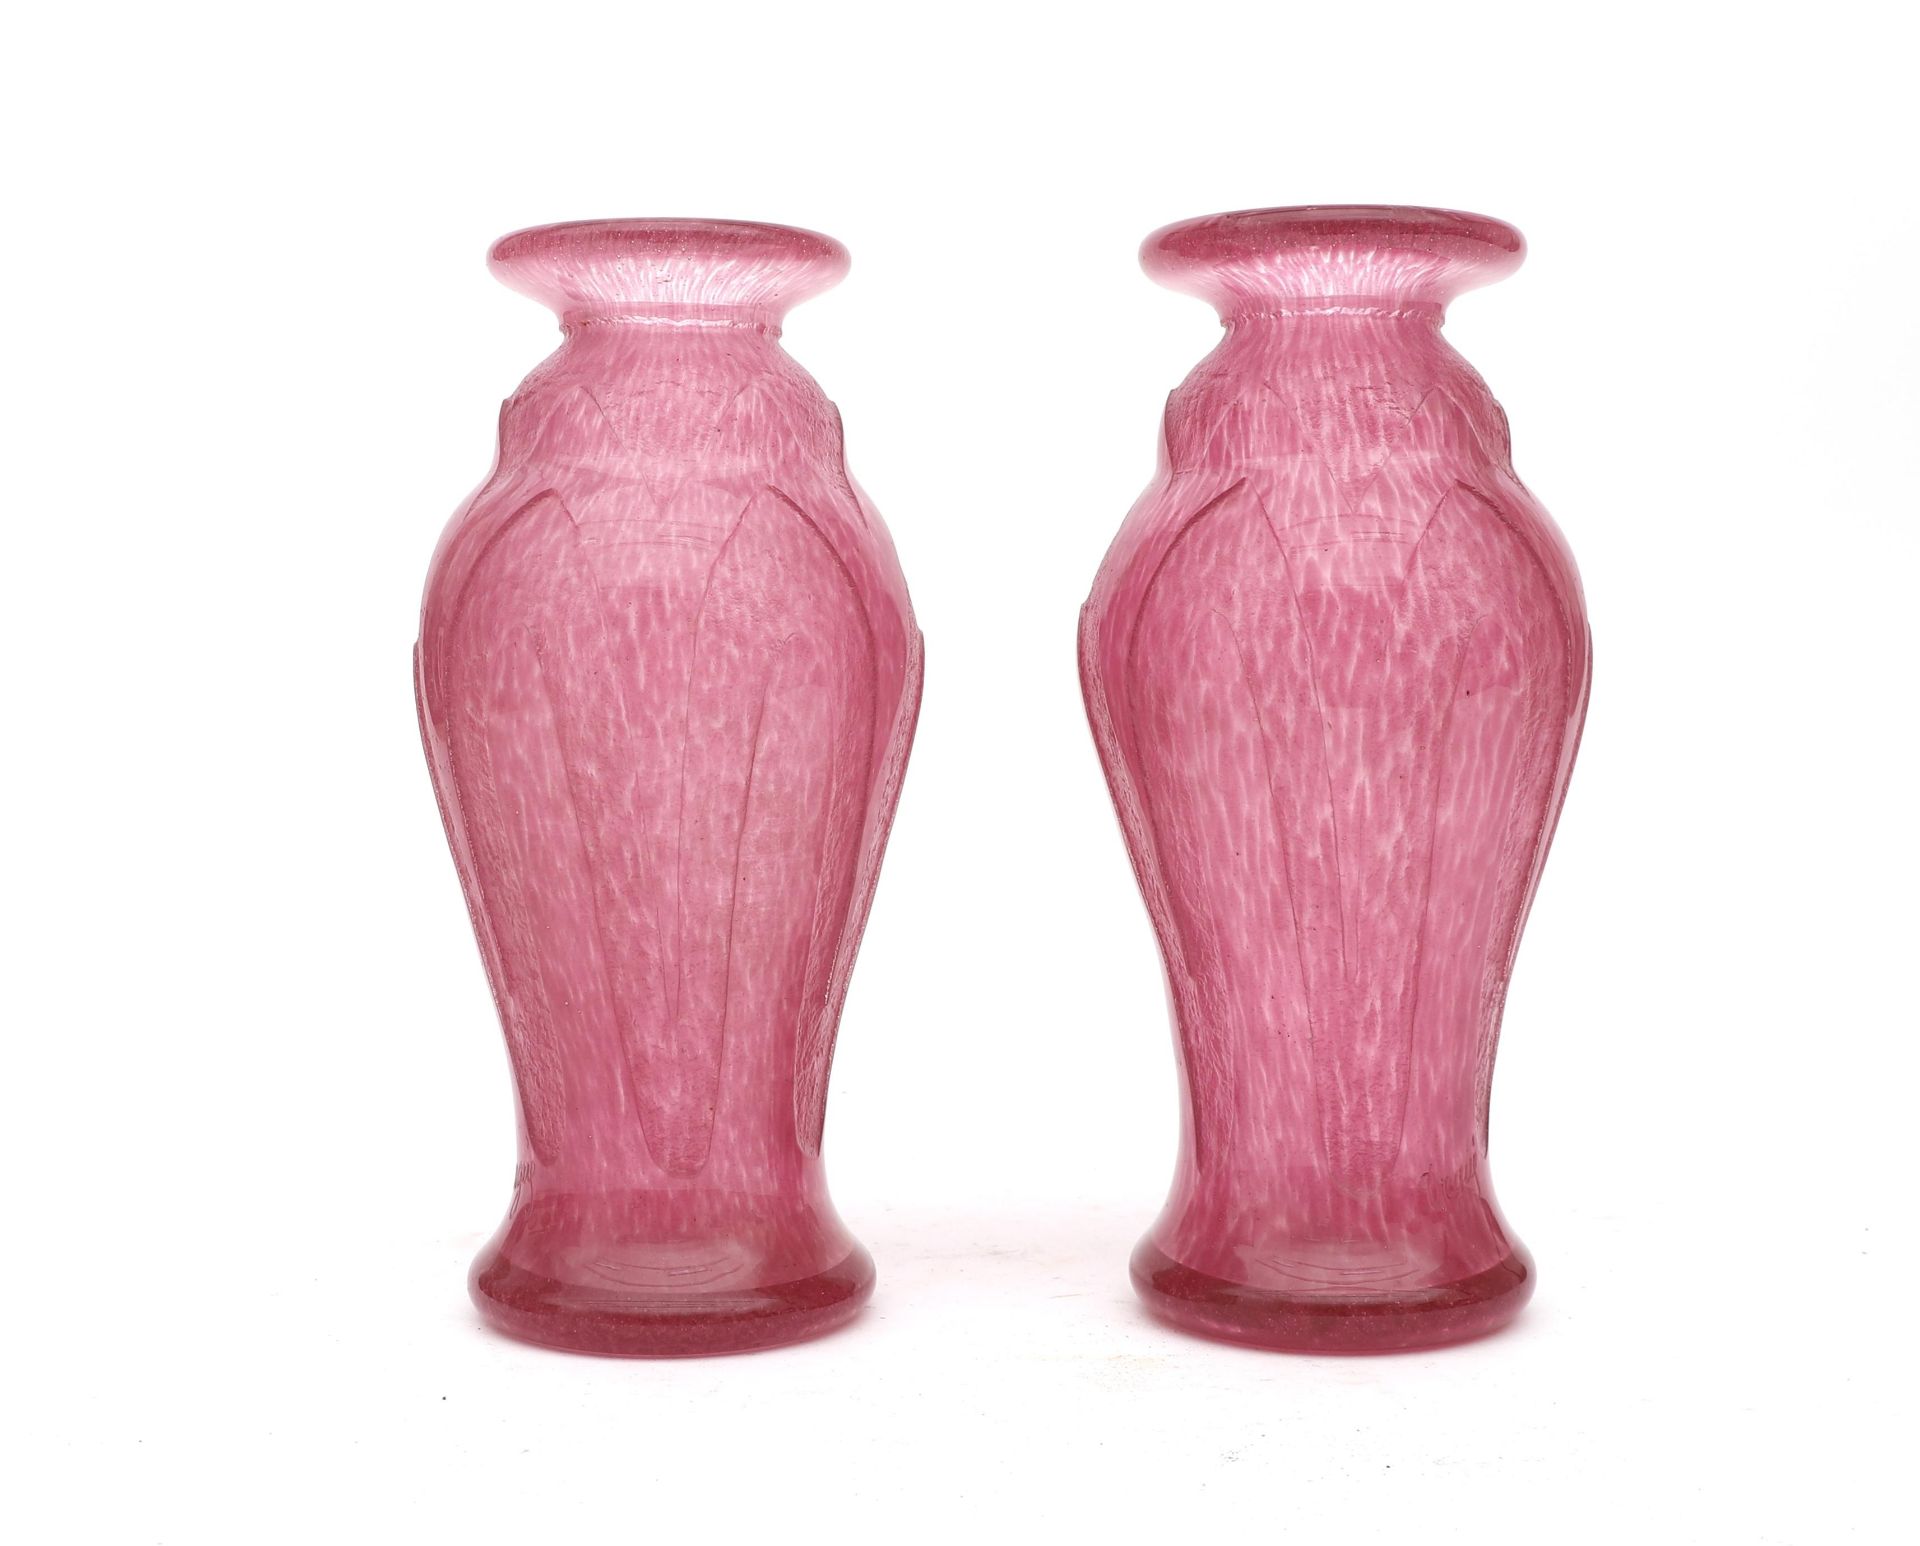 David Gueron (Degué) (1892–1950) A pair of etched pink glass vases, both signed. 22,5 cm. h. (2x)